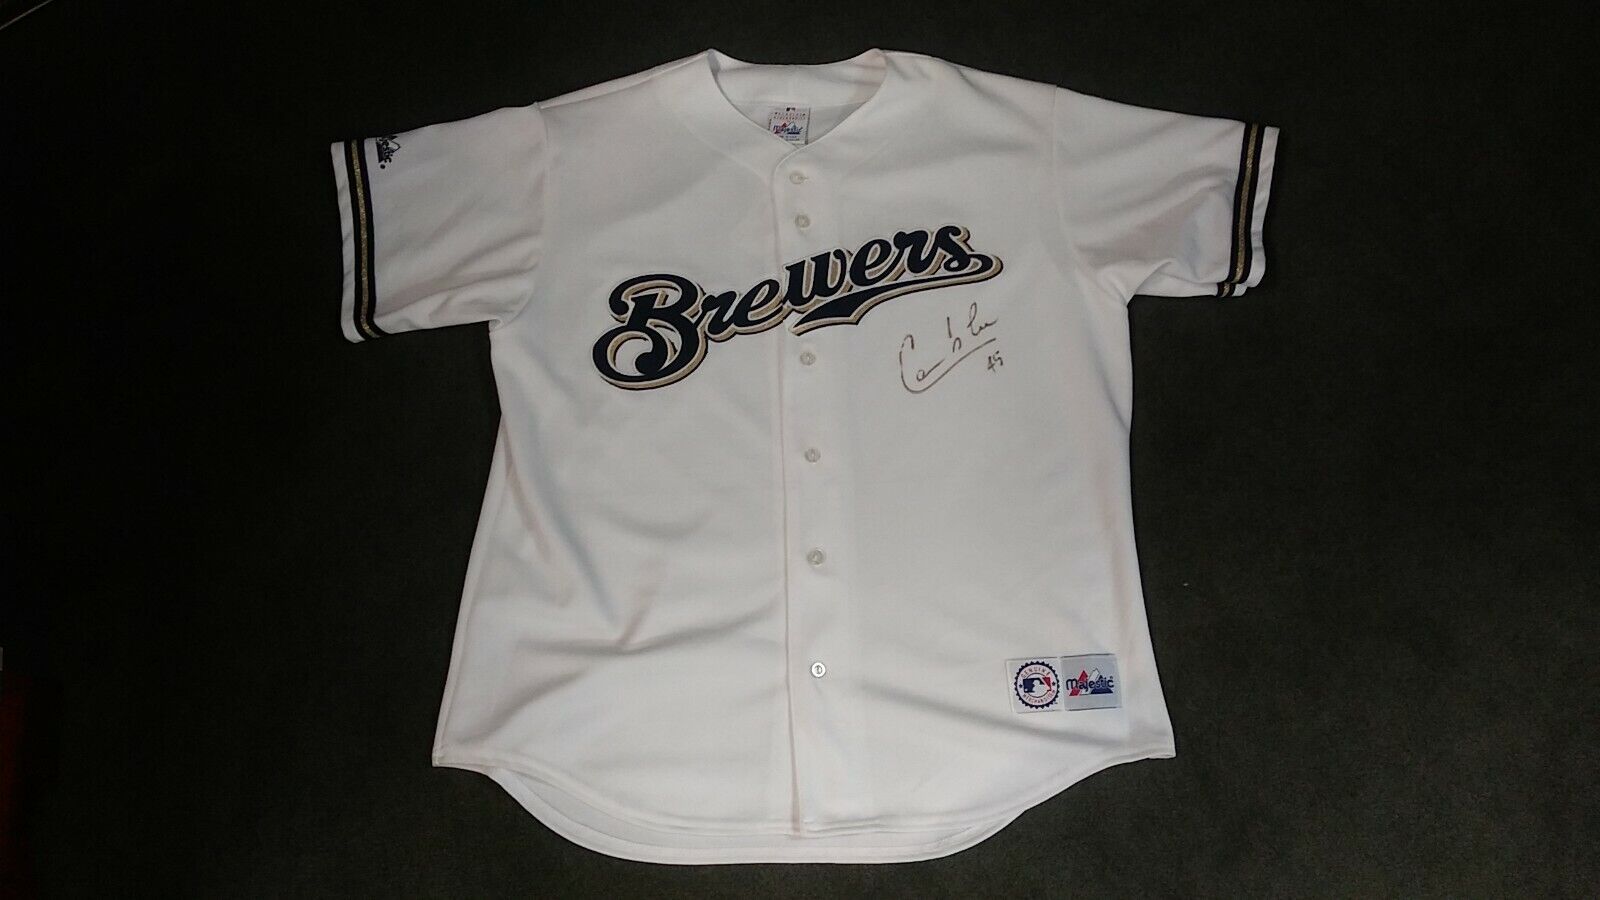 Signed autograph Carlos Lee #45 Milwaukee Brewers shirt jersey majestic large